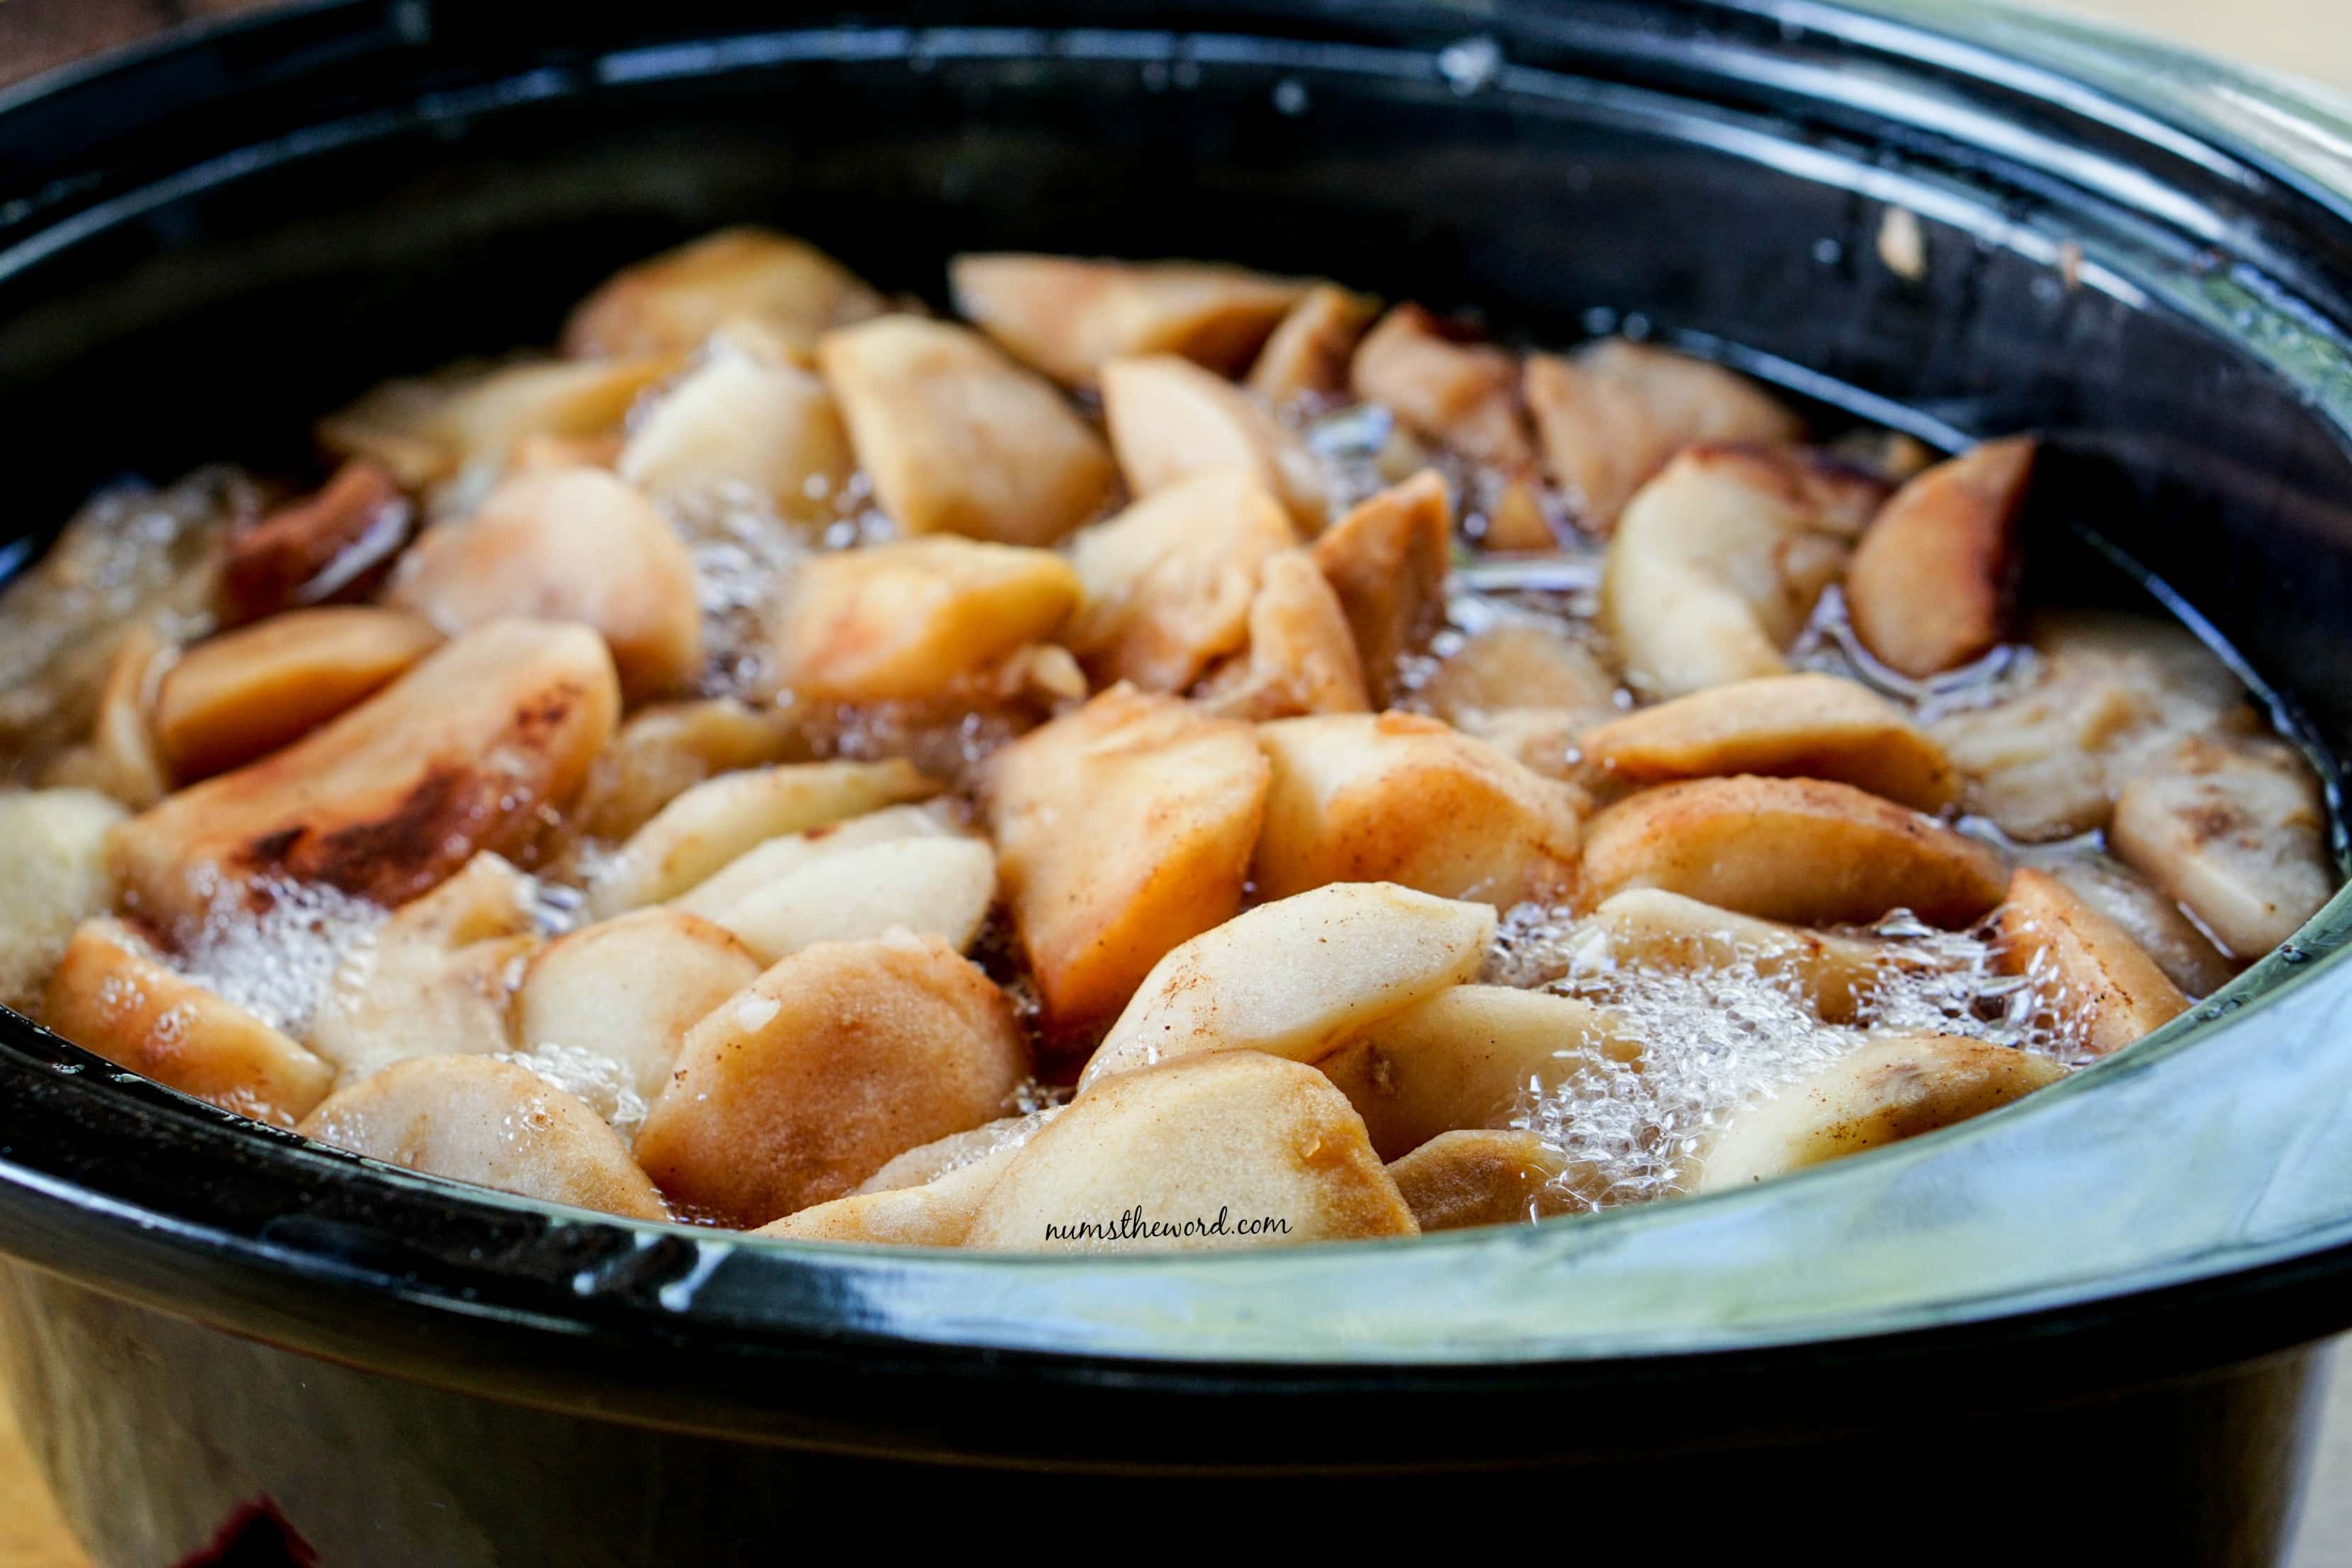 Crock Pot Apple Sauce - Apples cooked in crock pot but not mashed. Photo from side angle.